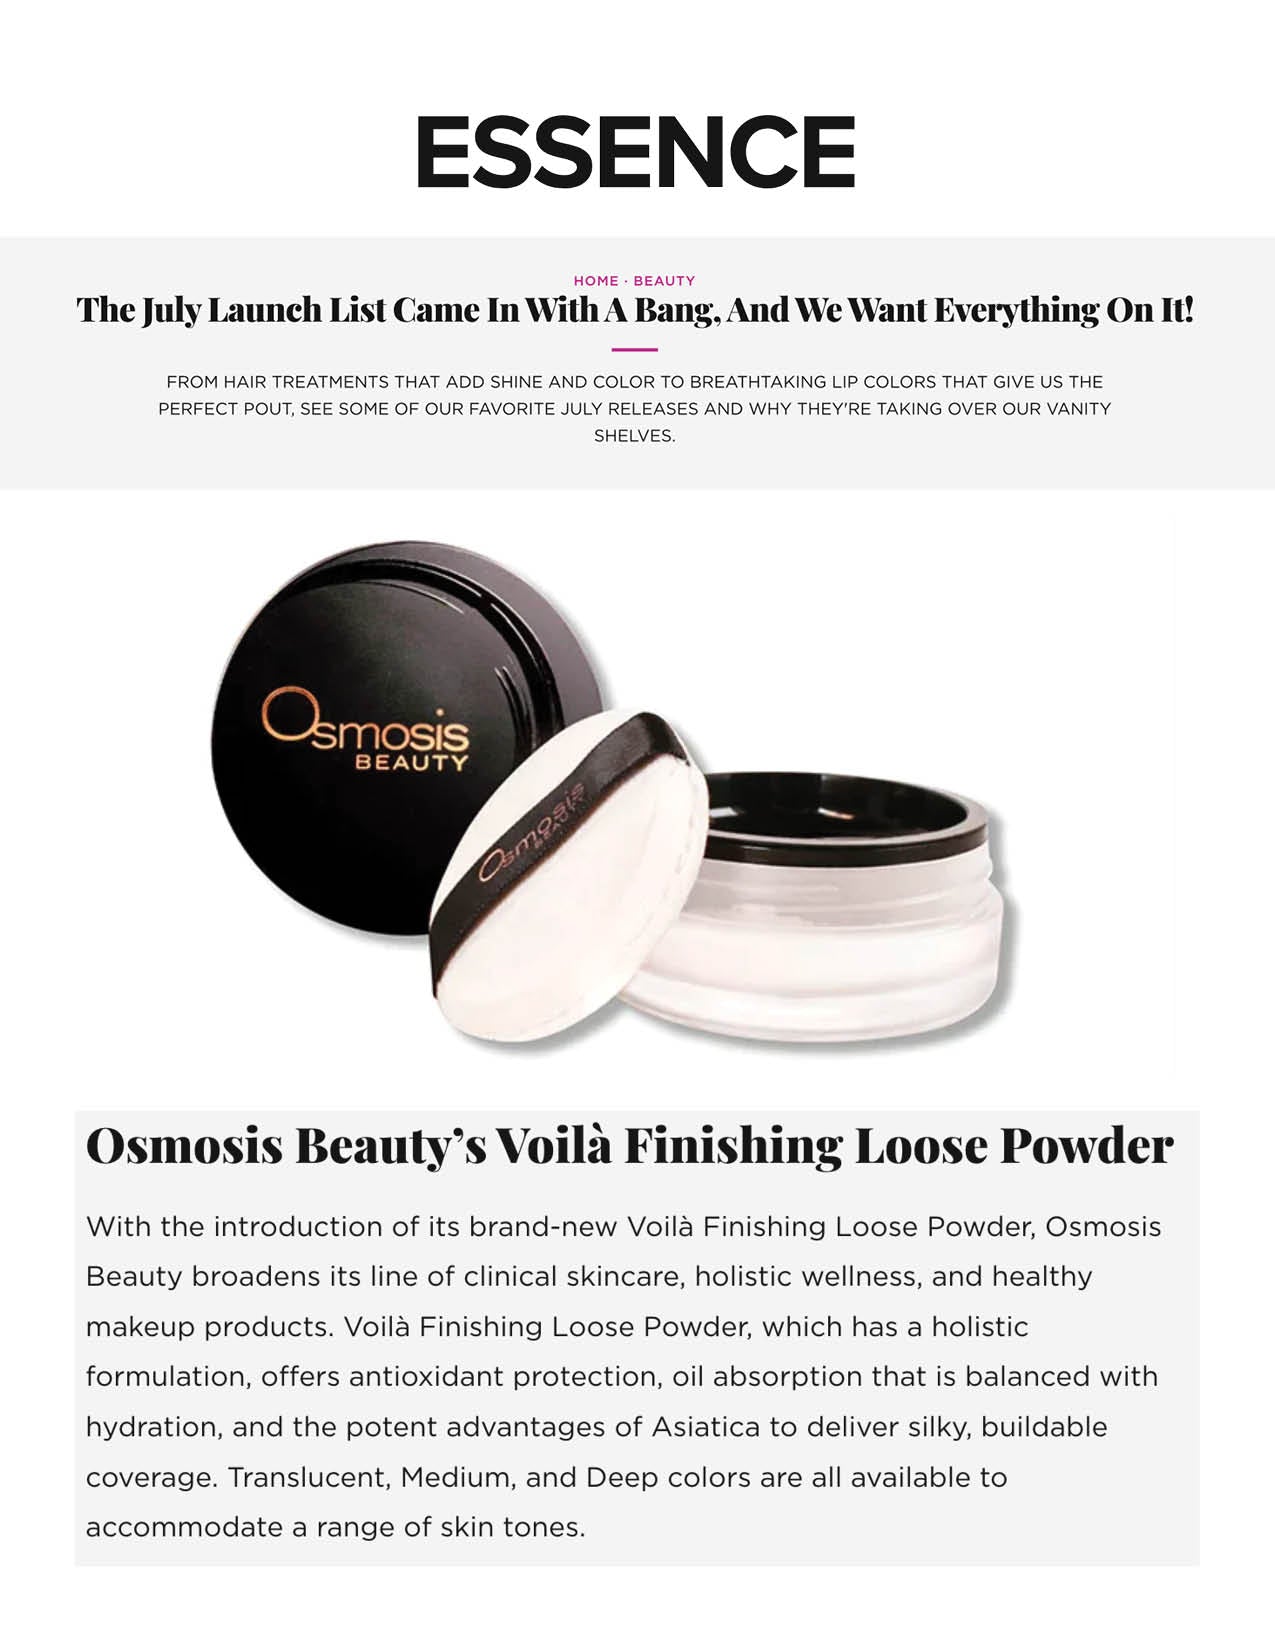 Voilà Finishing Loose Powder is being featured on Essence.com in a story titled, The July Launch List Came In With A Bang, And We Want Everything On It!